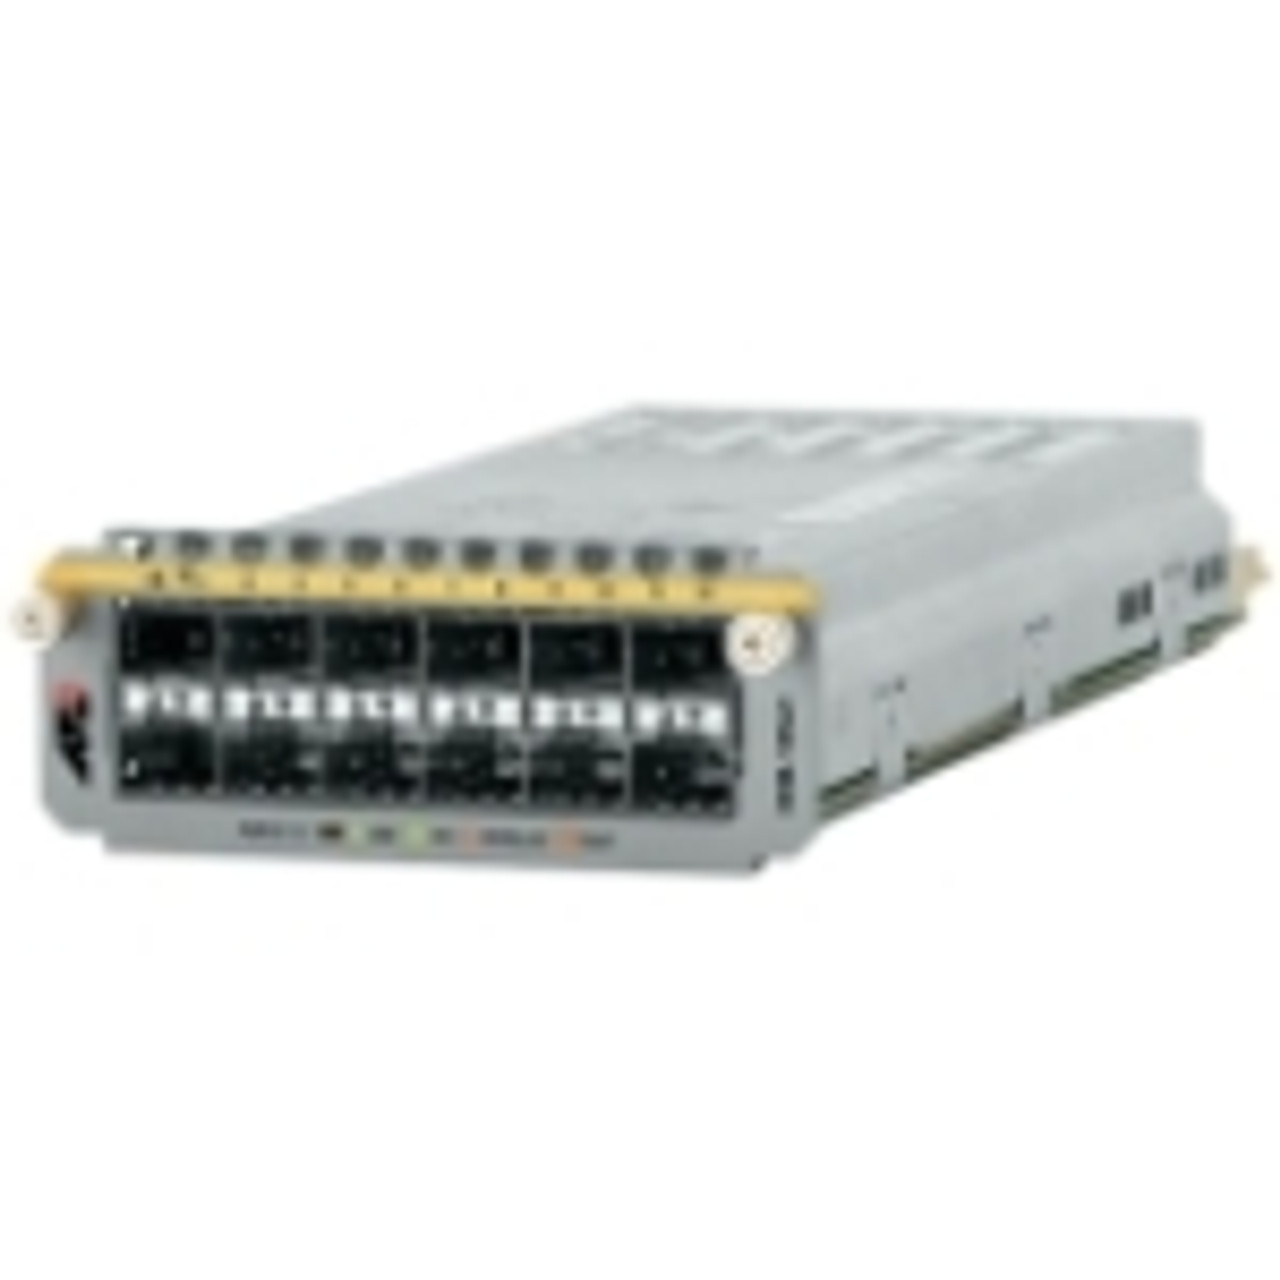 AT-XEM-12SV2 Allied Telesis Expansion Module For Data Networking, Optical Network 12 x SFP (mini-GBIC) 12 x Expansion Slots